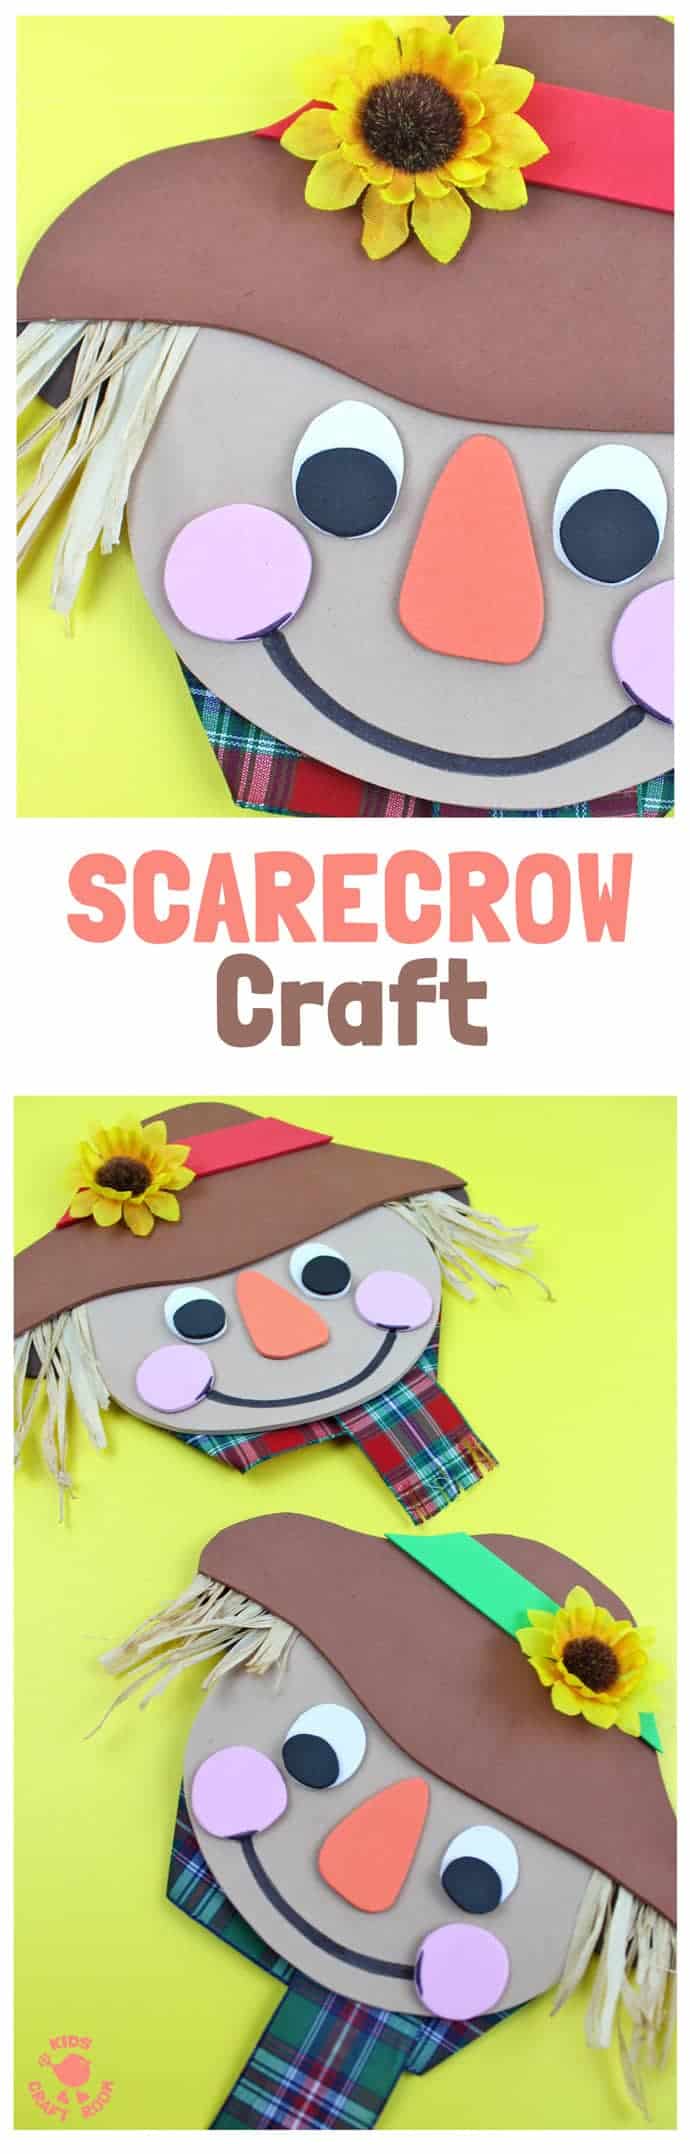 FOAM SCARECROW CRAFT - This cute foam scarecrow craft is great as a Fall craft or for harvest time and Thanksgiving. A free printable scarecrow template makes it super easy and fun to make. #scarecrow #scarecrowcrafts #springcrafts #fallcrafts #farmcrafts #scarecrow #kidscrafts #craftsforkids #kidscraftroom #autumncrafts #farmyard #farmyardcrafts